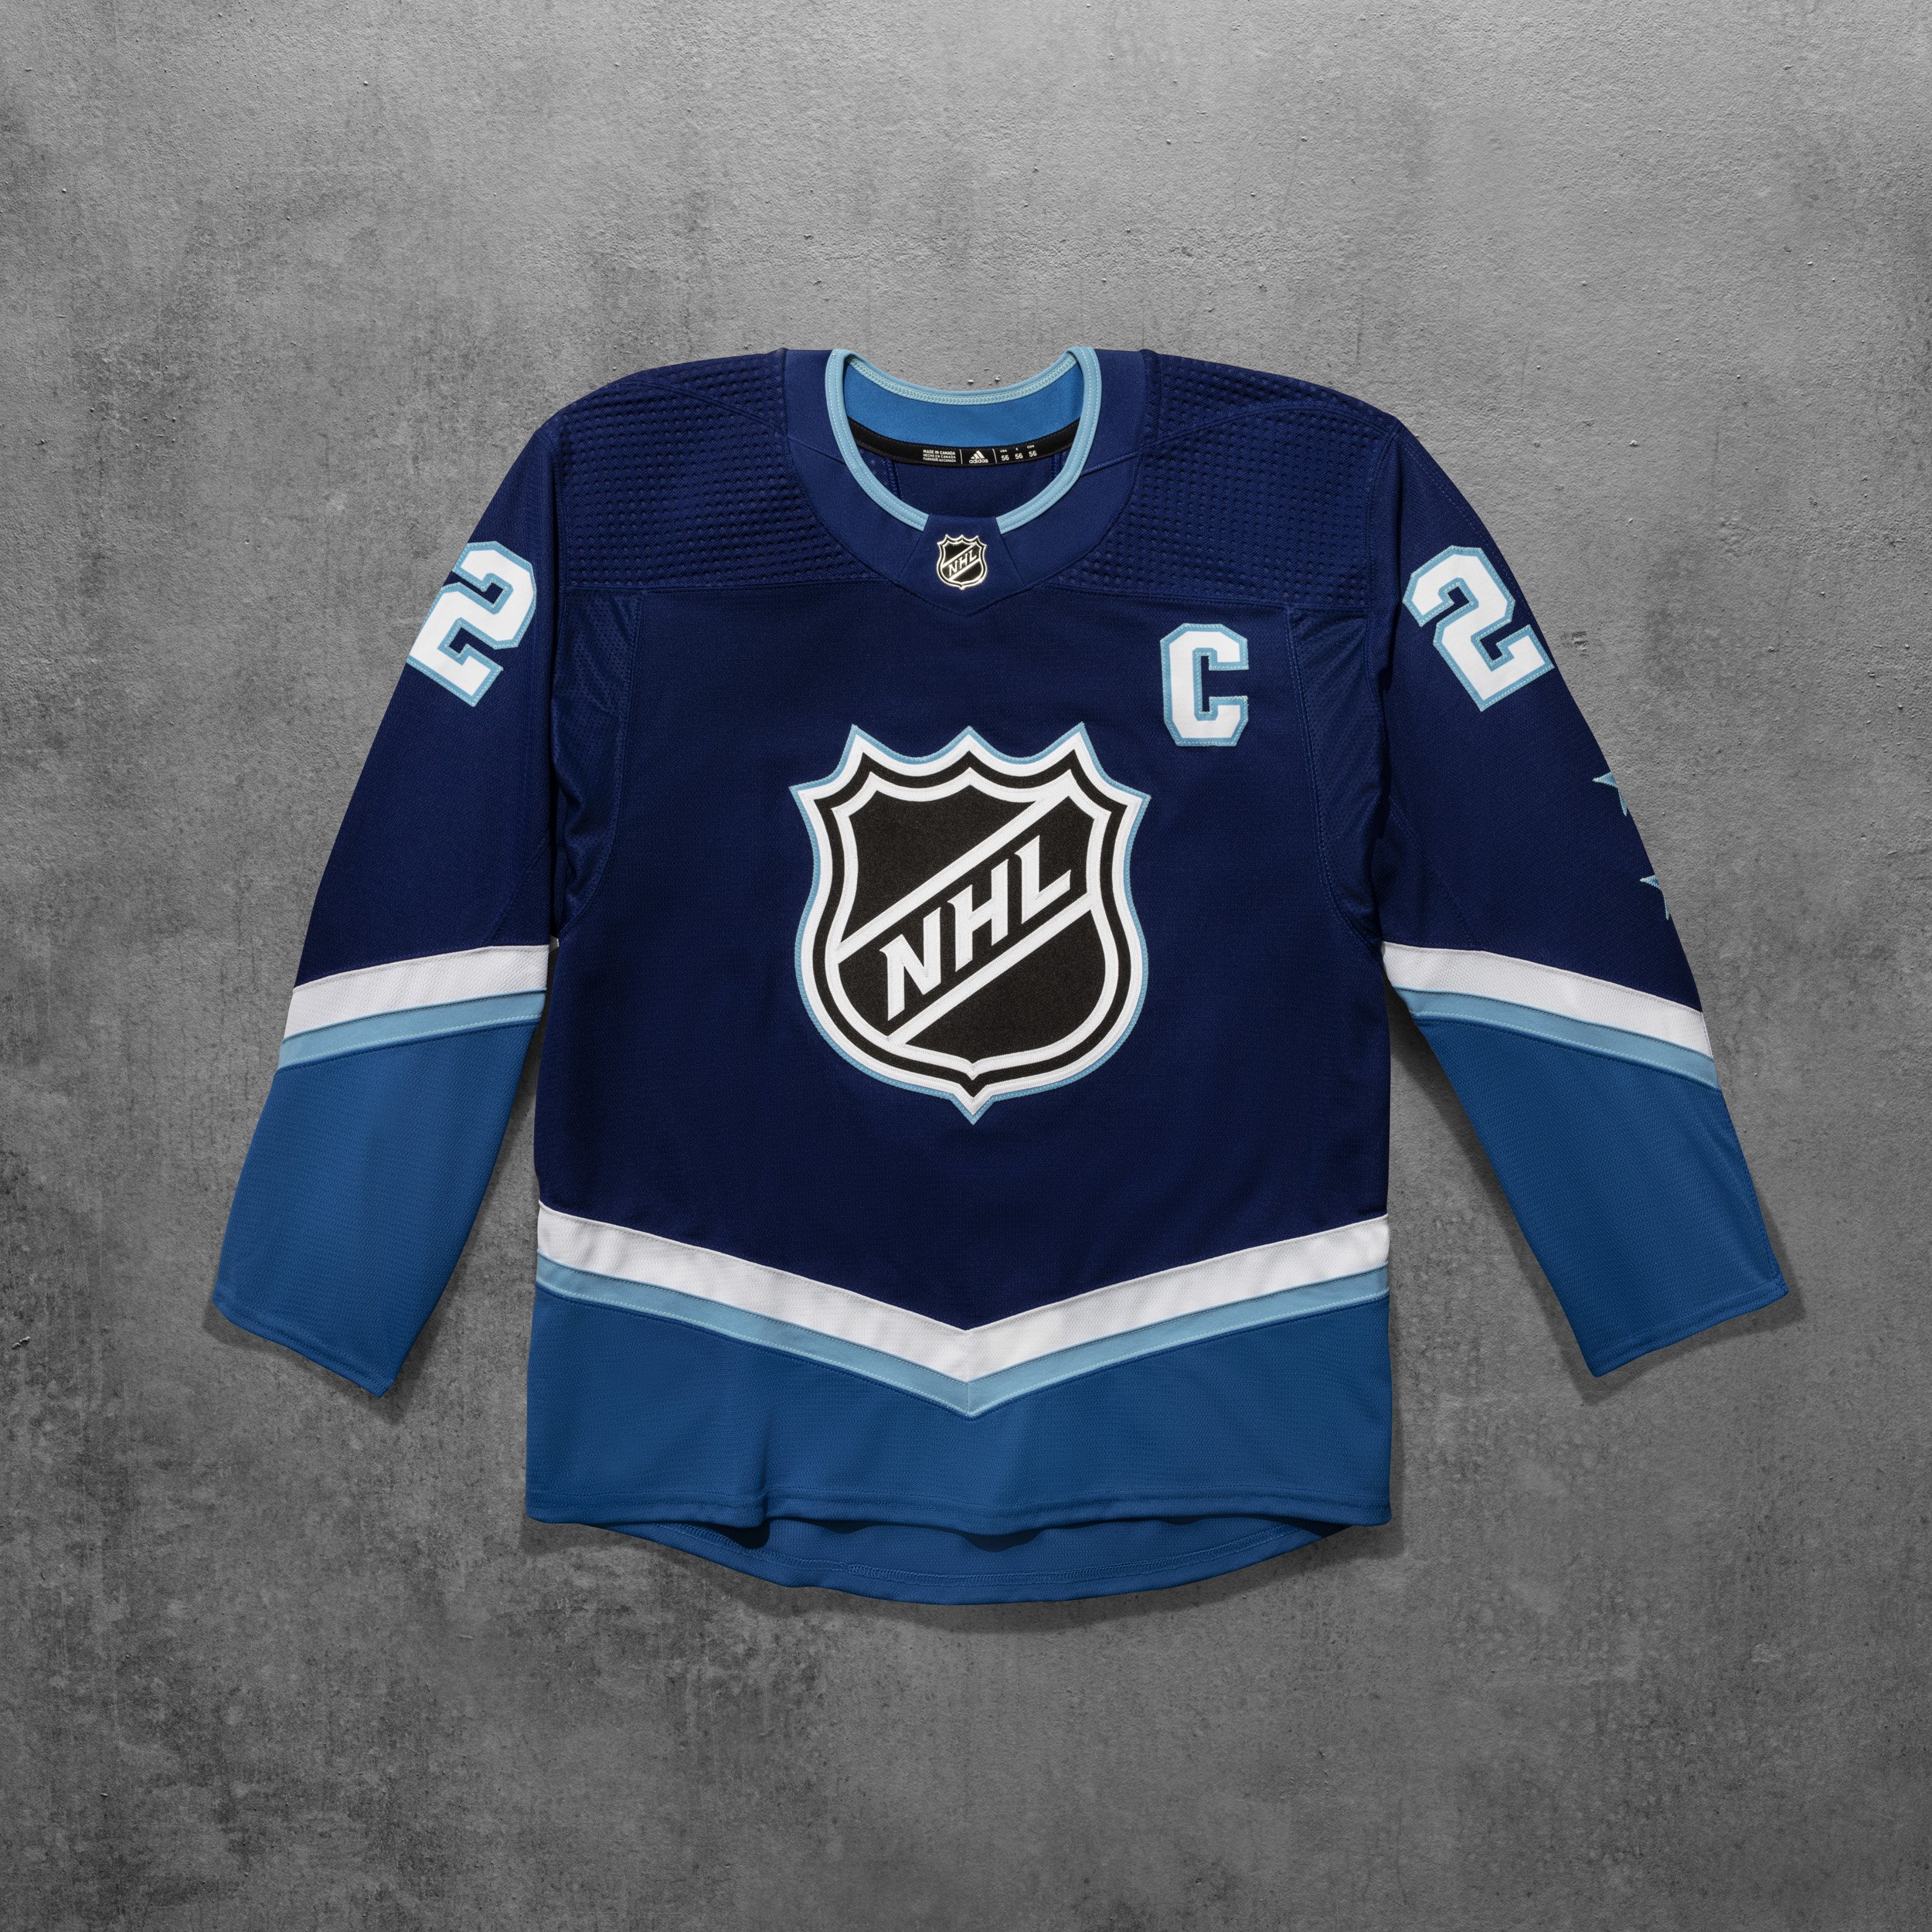 Where to buy NHL All Star jerseys, shirts and more online 